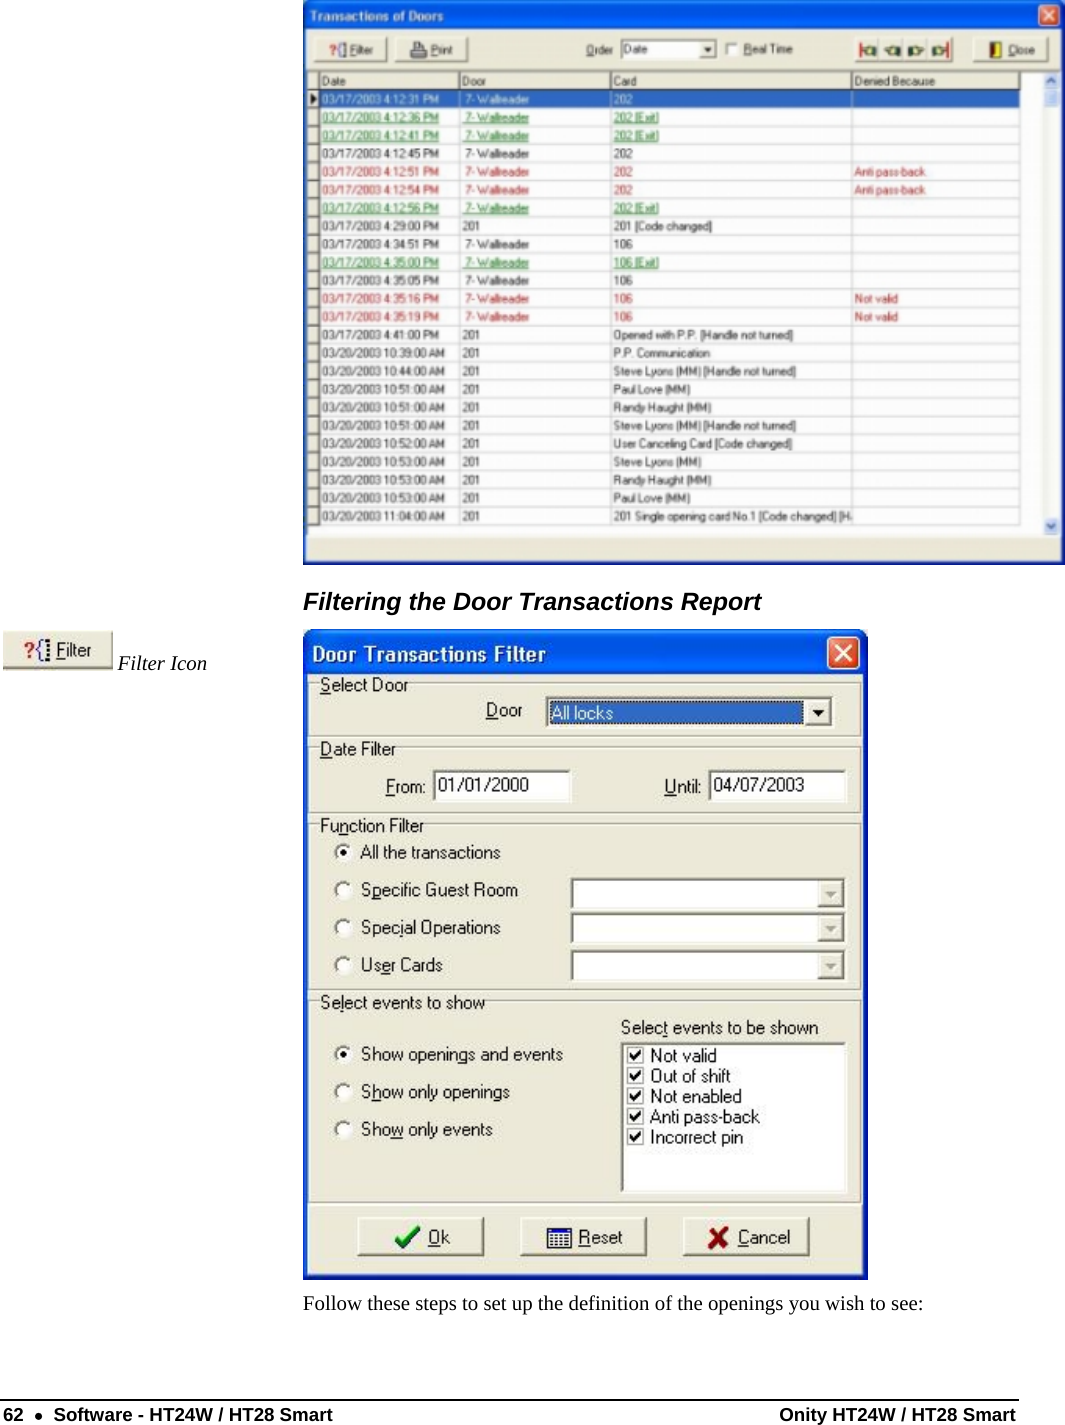  62  •  Software - HT24W / HT28 Smart  Onity HT24W / HT28 Smart  Filtering the Door Transactions Report  Filter Icon  Follow these steps to set up the definition of the openings you wish to see: 